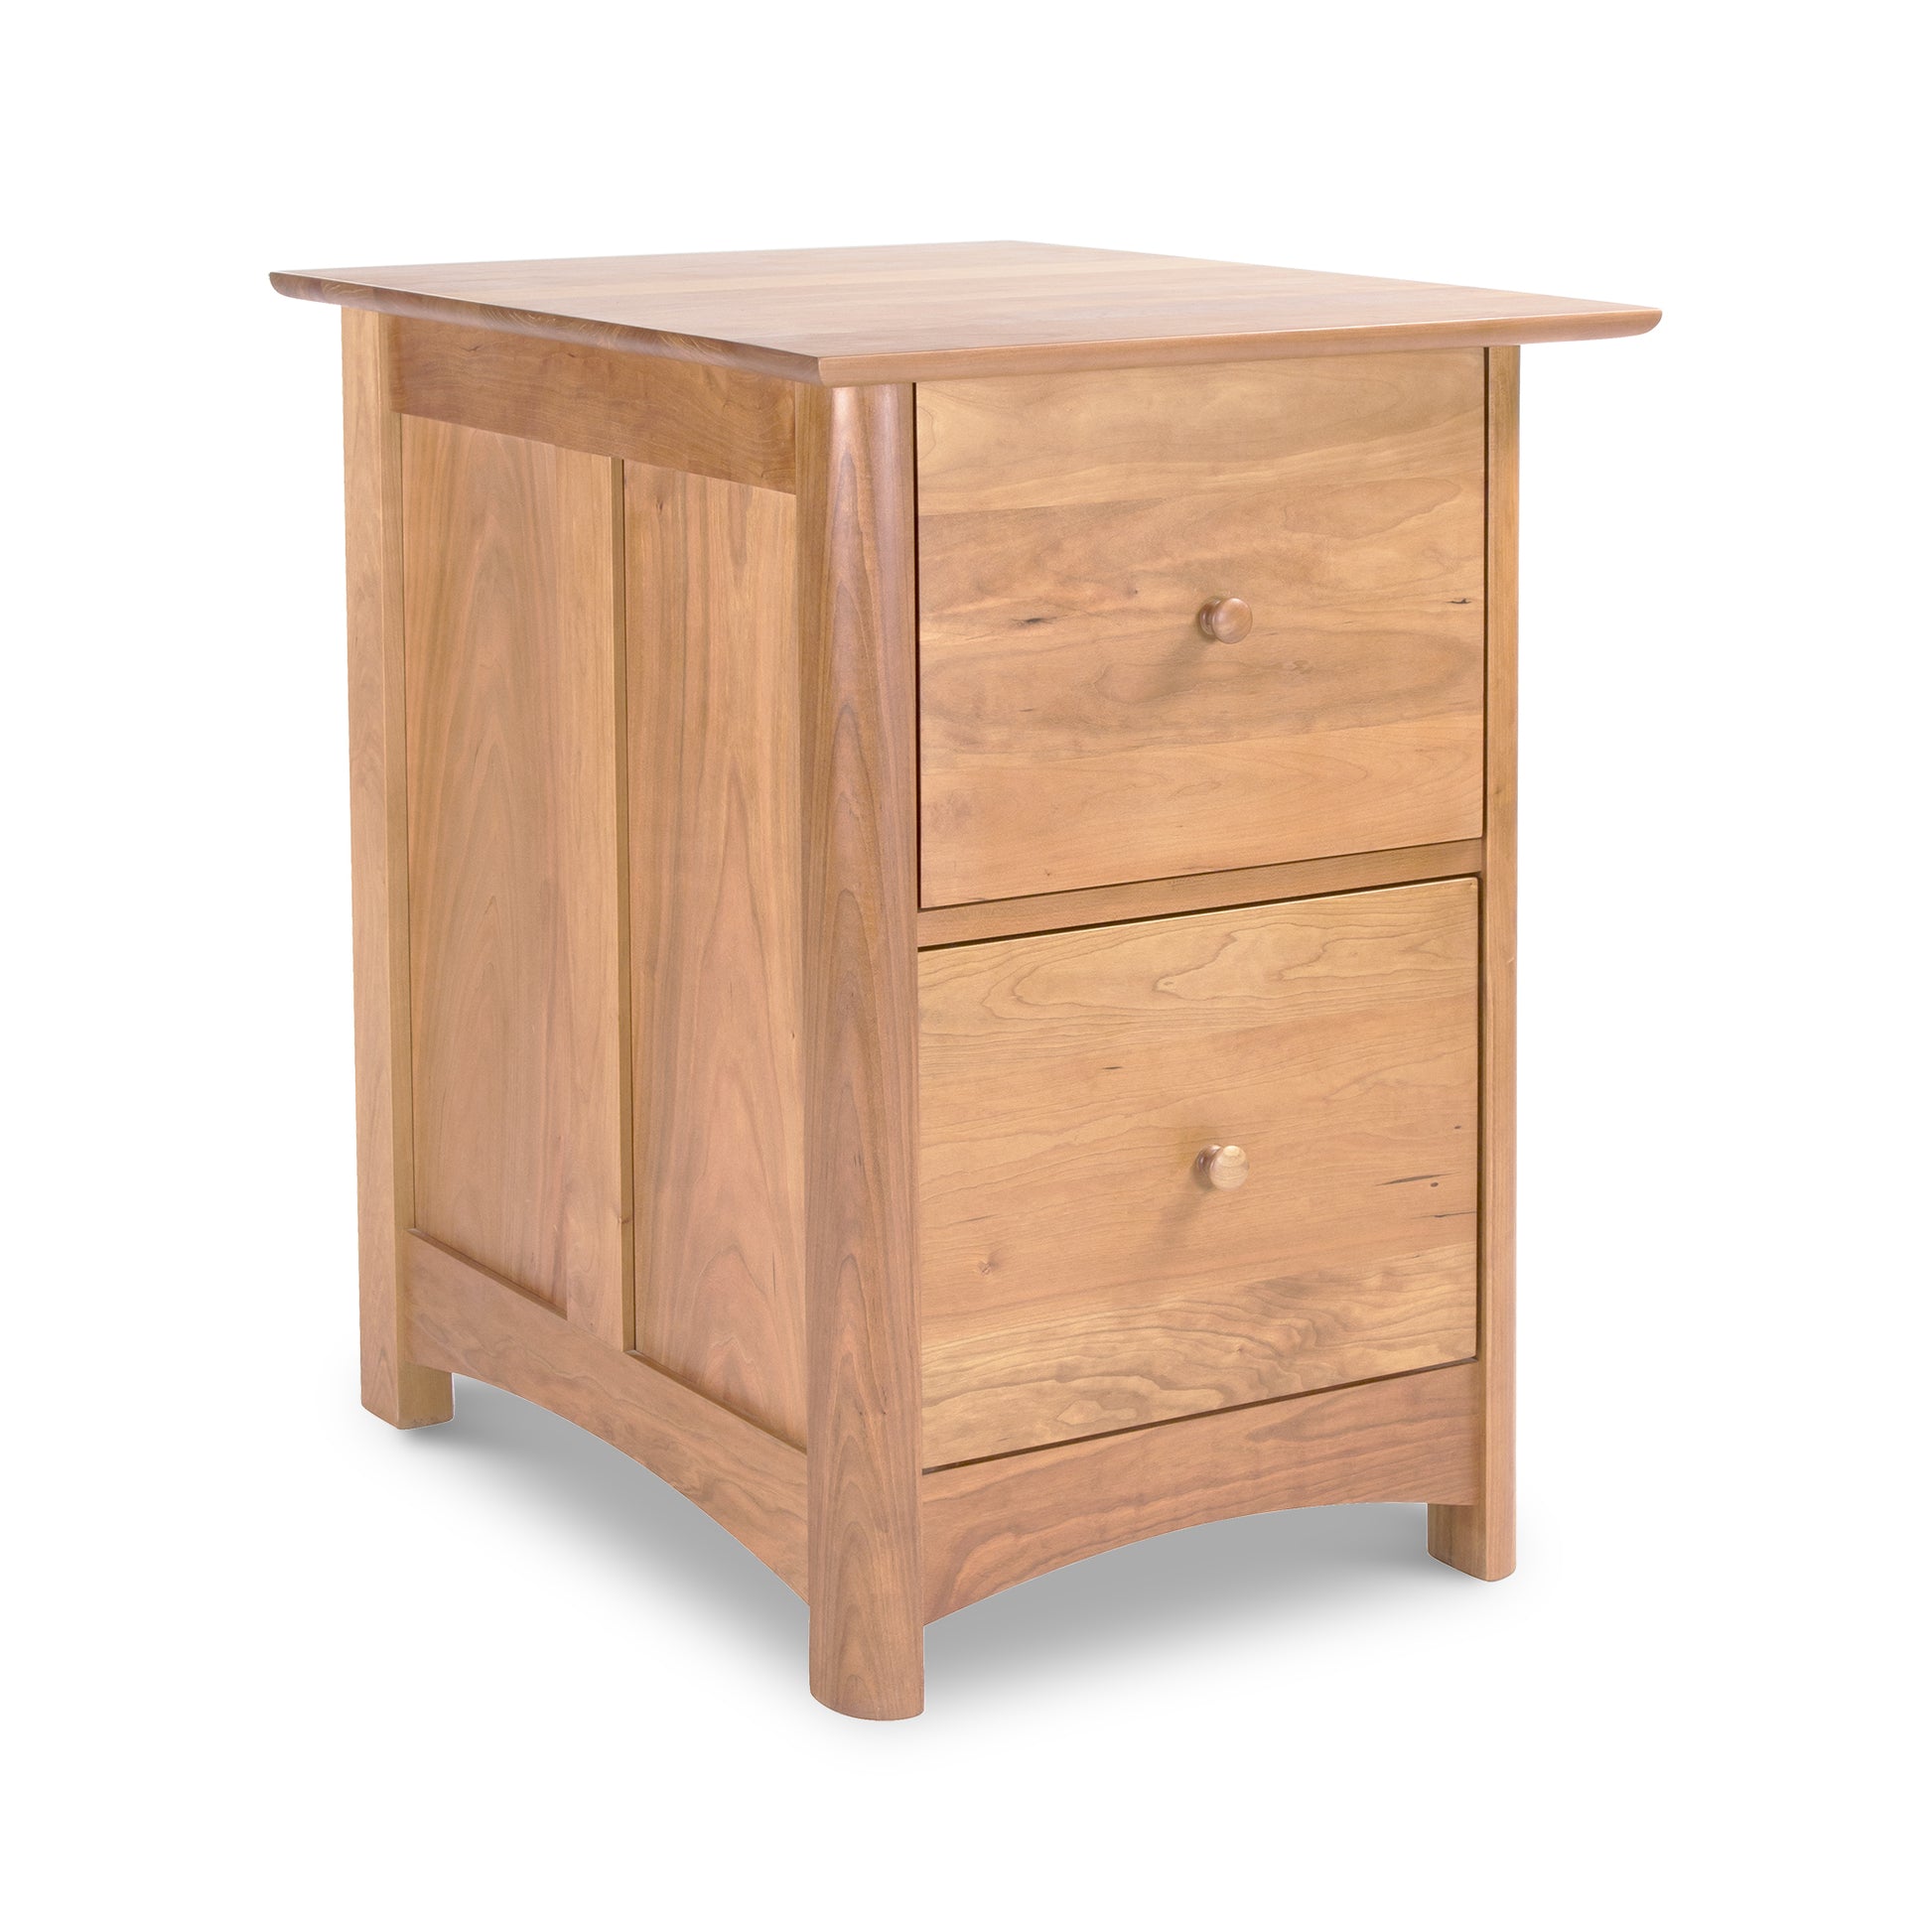 A Heartwood Shaker 2-Drawer Vertical File Cabinet with two drawers by Vermont Furniture Designs.